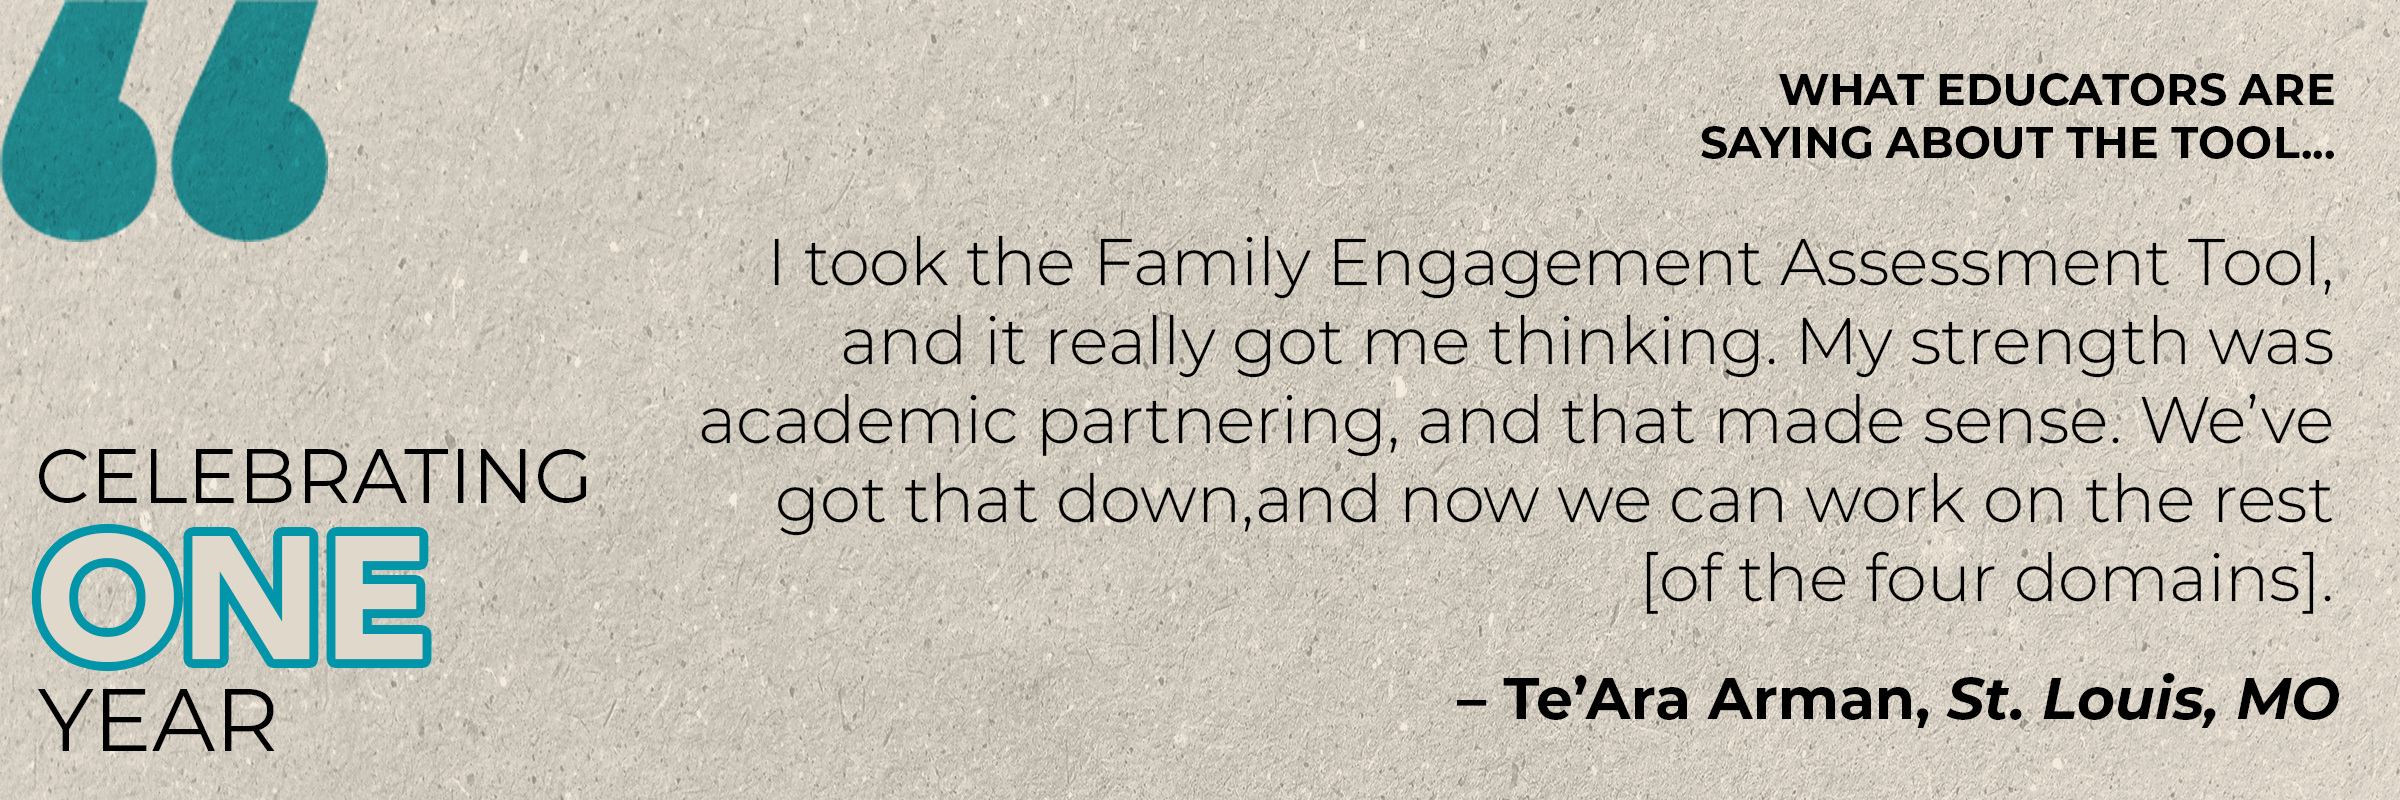 "I took the Family Engagement Assessment Tool, and it really got me thinking. My strength was academic partnering, and that made sense. We’ve got that down, and now we can work on the rest [of the four domains].” -- Te’Ara Arman, St. Louis, MO